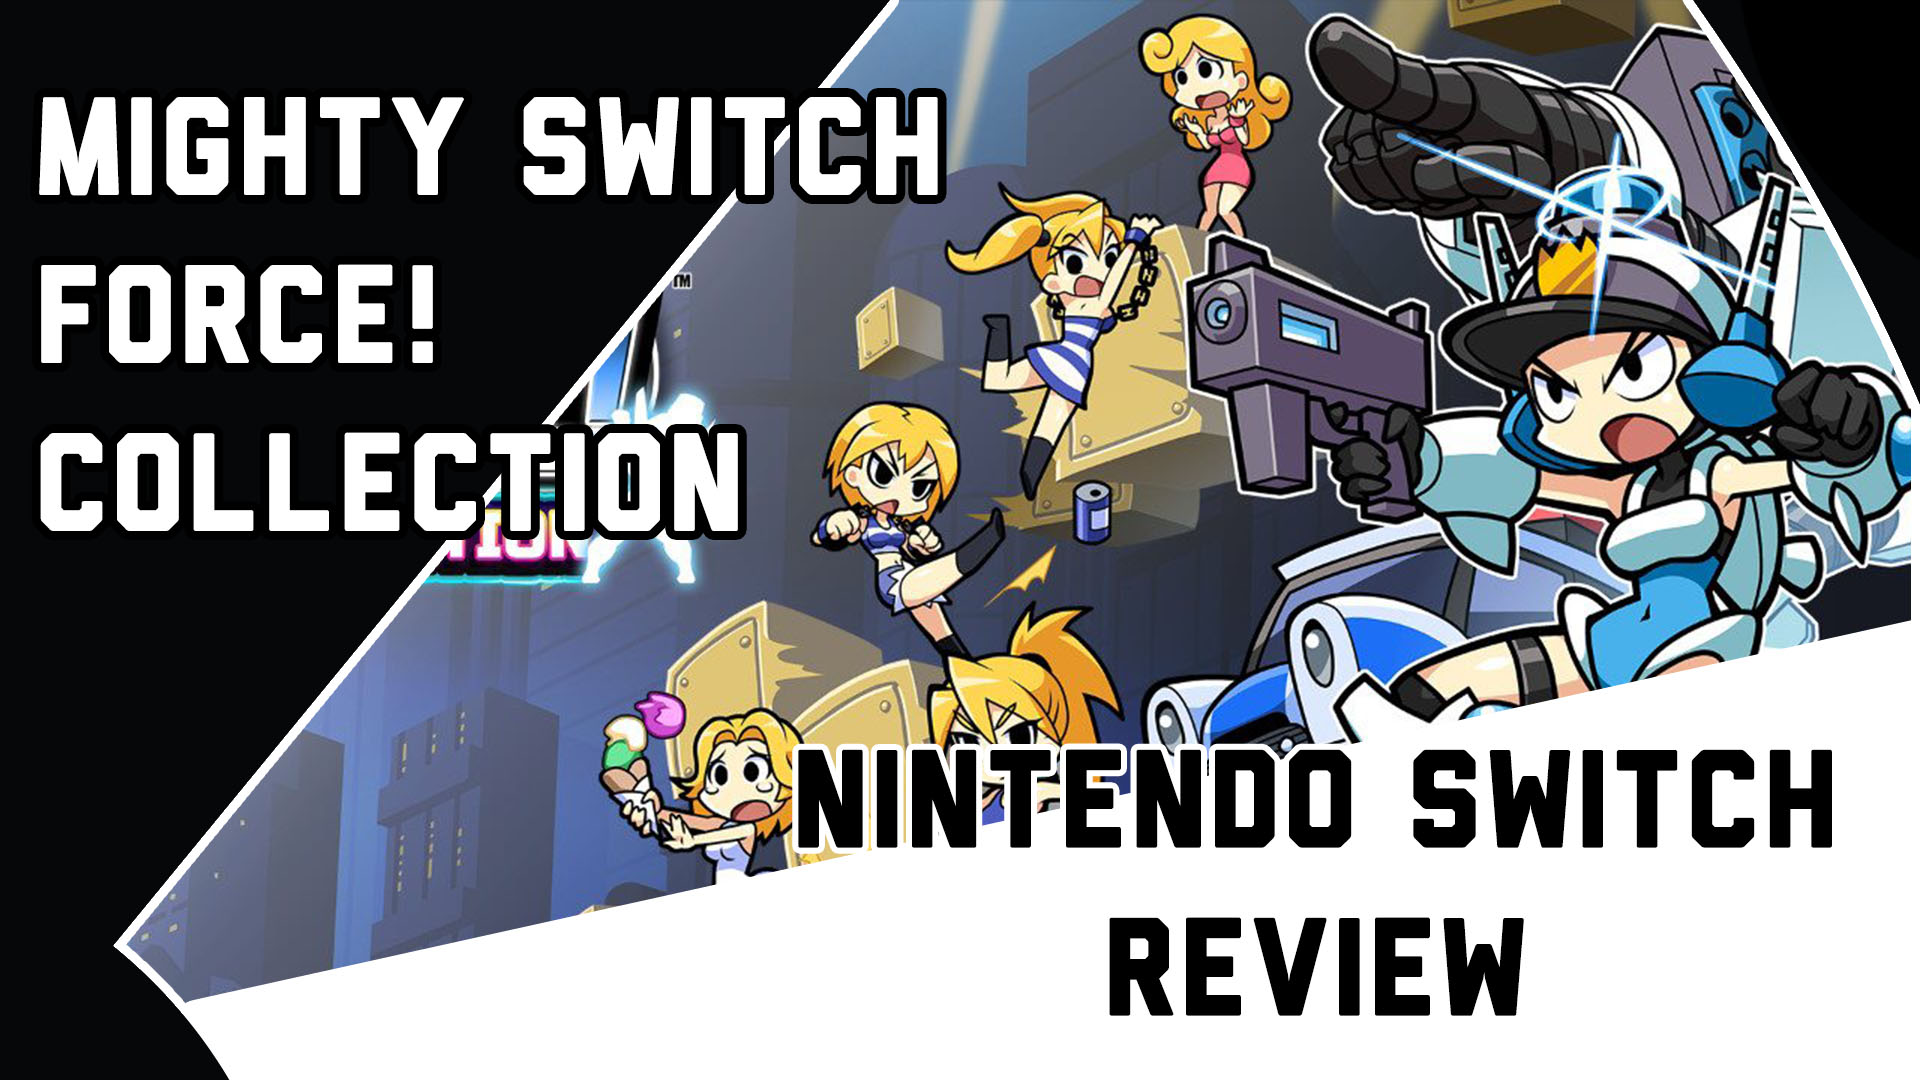 Mighty switch force collection